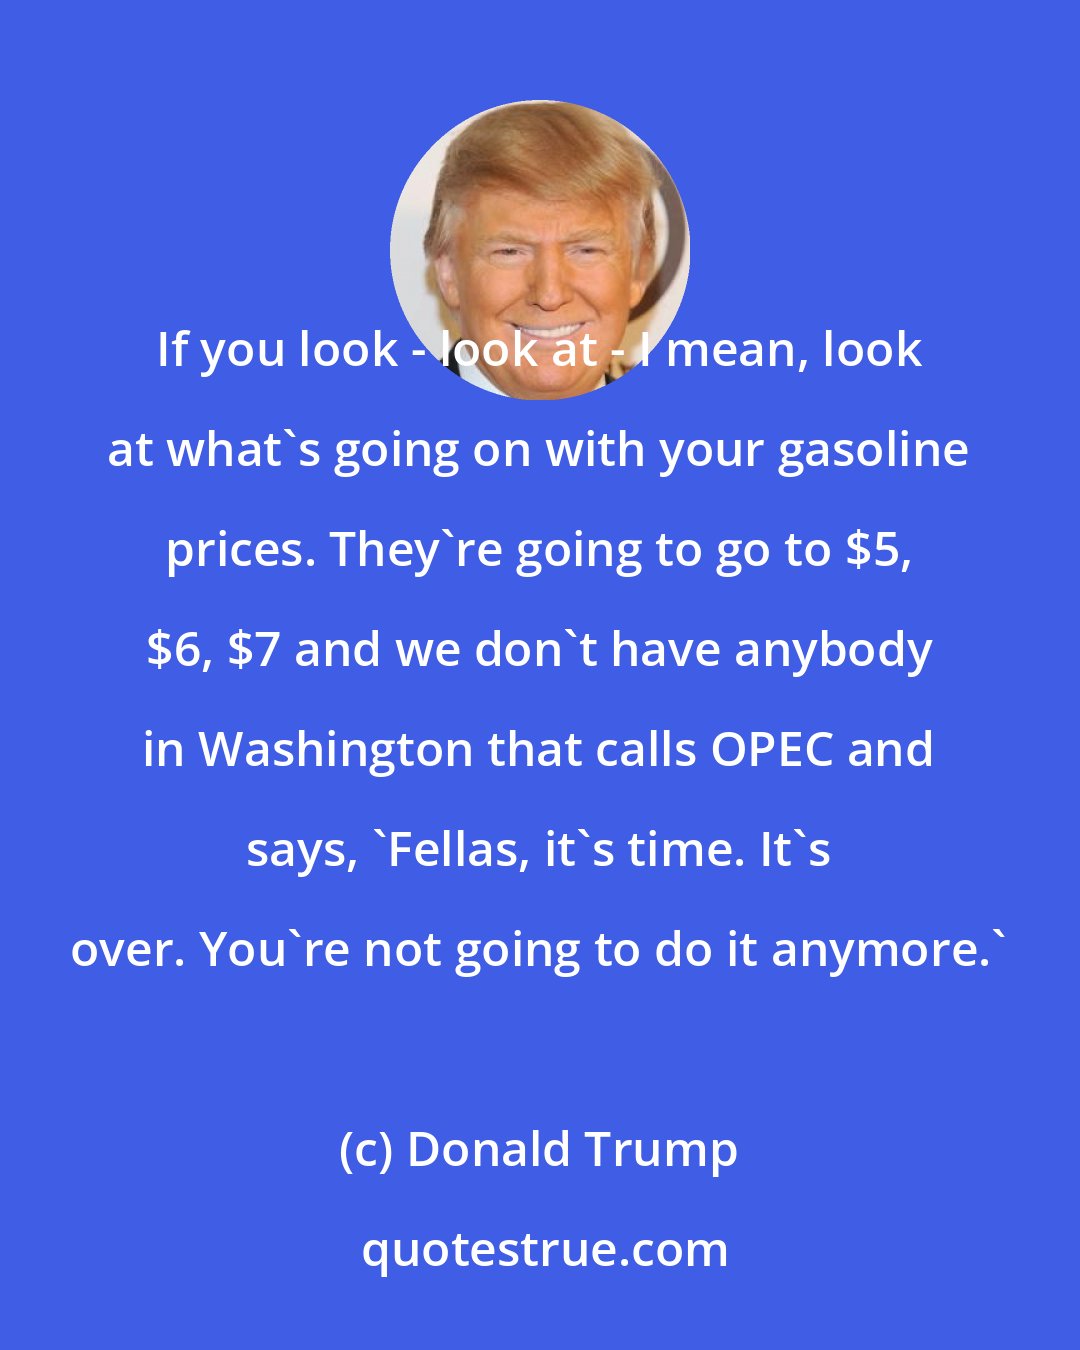 Donald Trump: If you look - look at - I mean, look at what's going on with your gasoline prices. They're going to go to $5, $6, $7 and we don't have anybody in Washington that calls OPEC and says, 'Fellas, it's time. It's over. You're not going to do it anymore.'